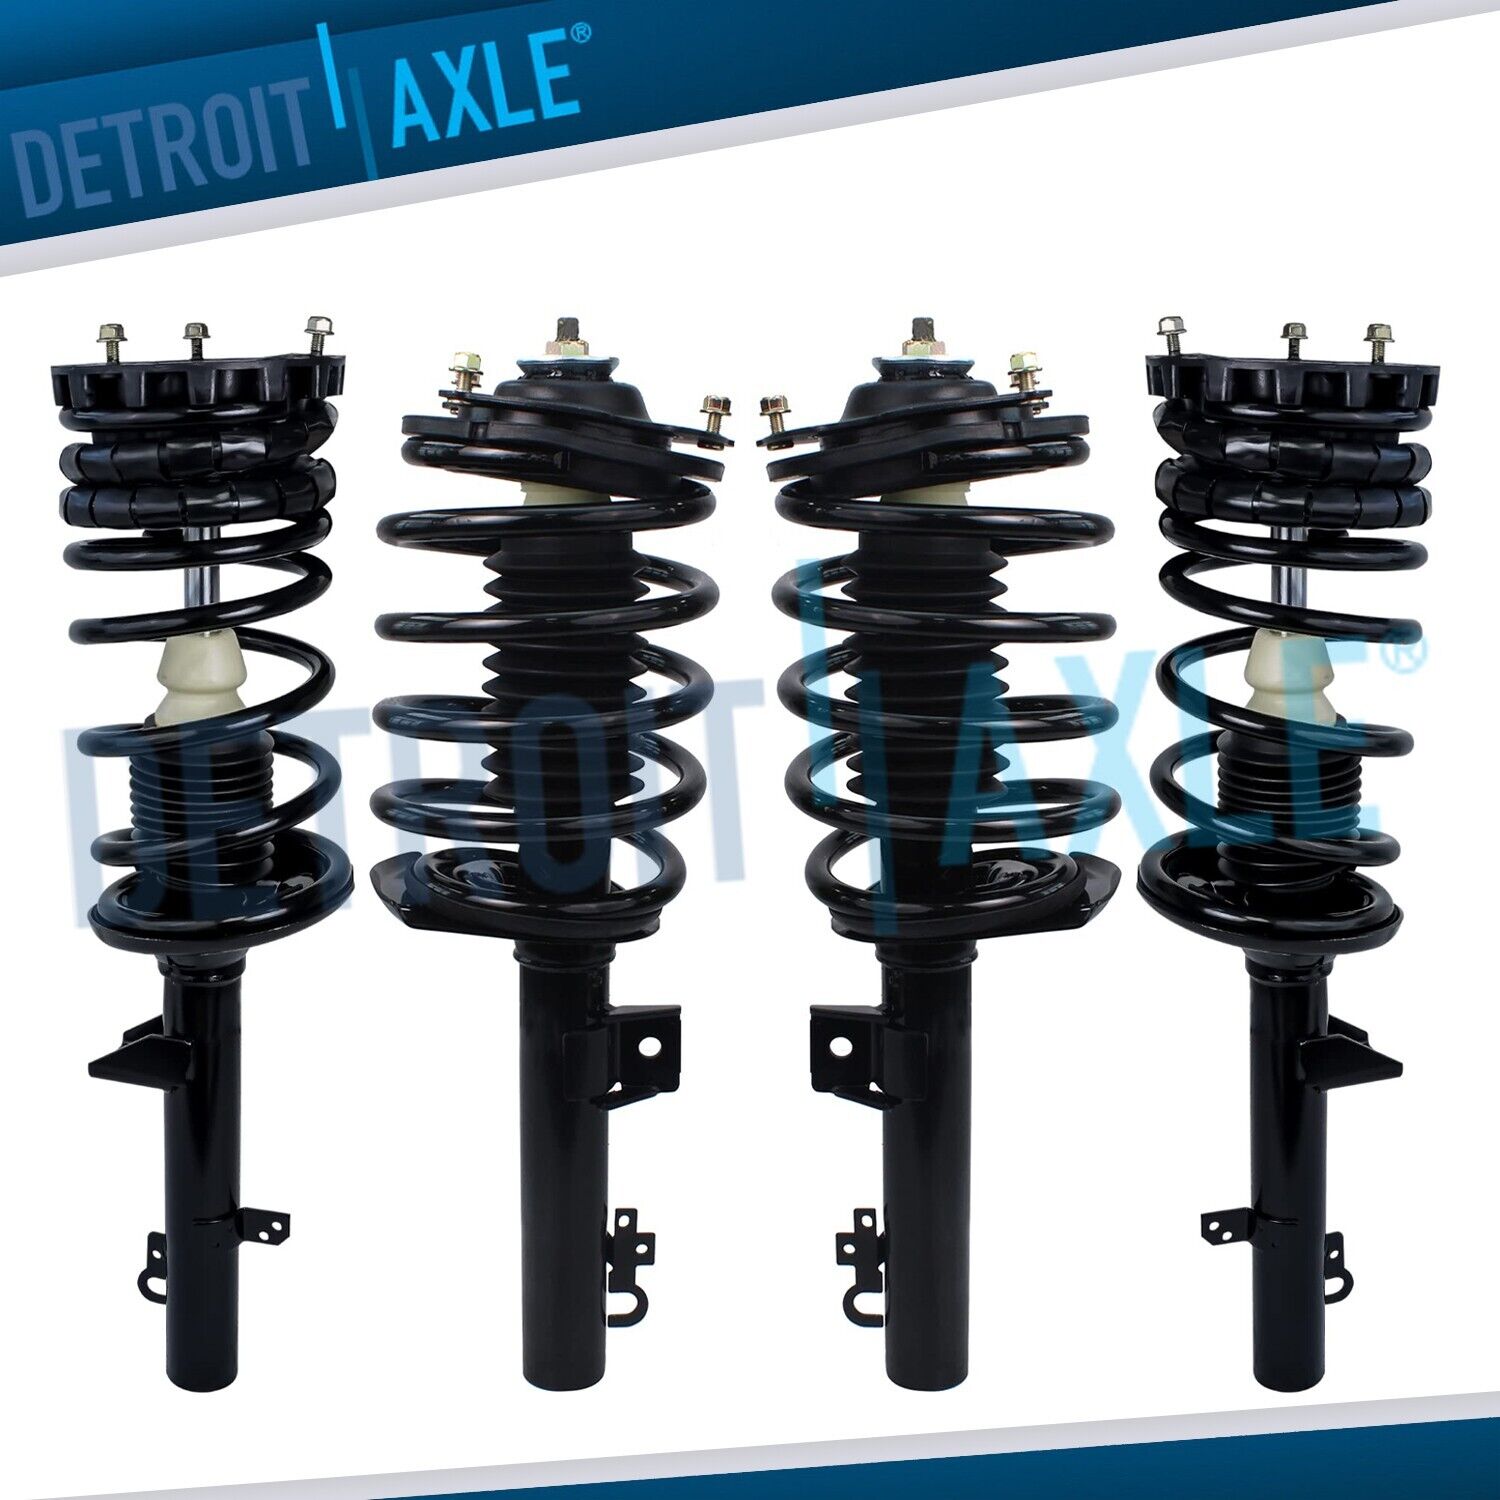 Ford Taurus Mercury Sable Struts Complete Coil Assembly For Front & Rear Sedan